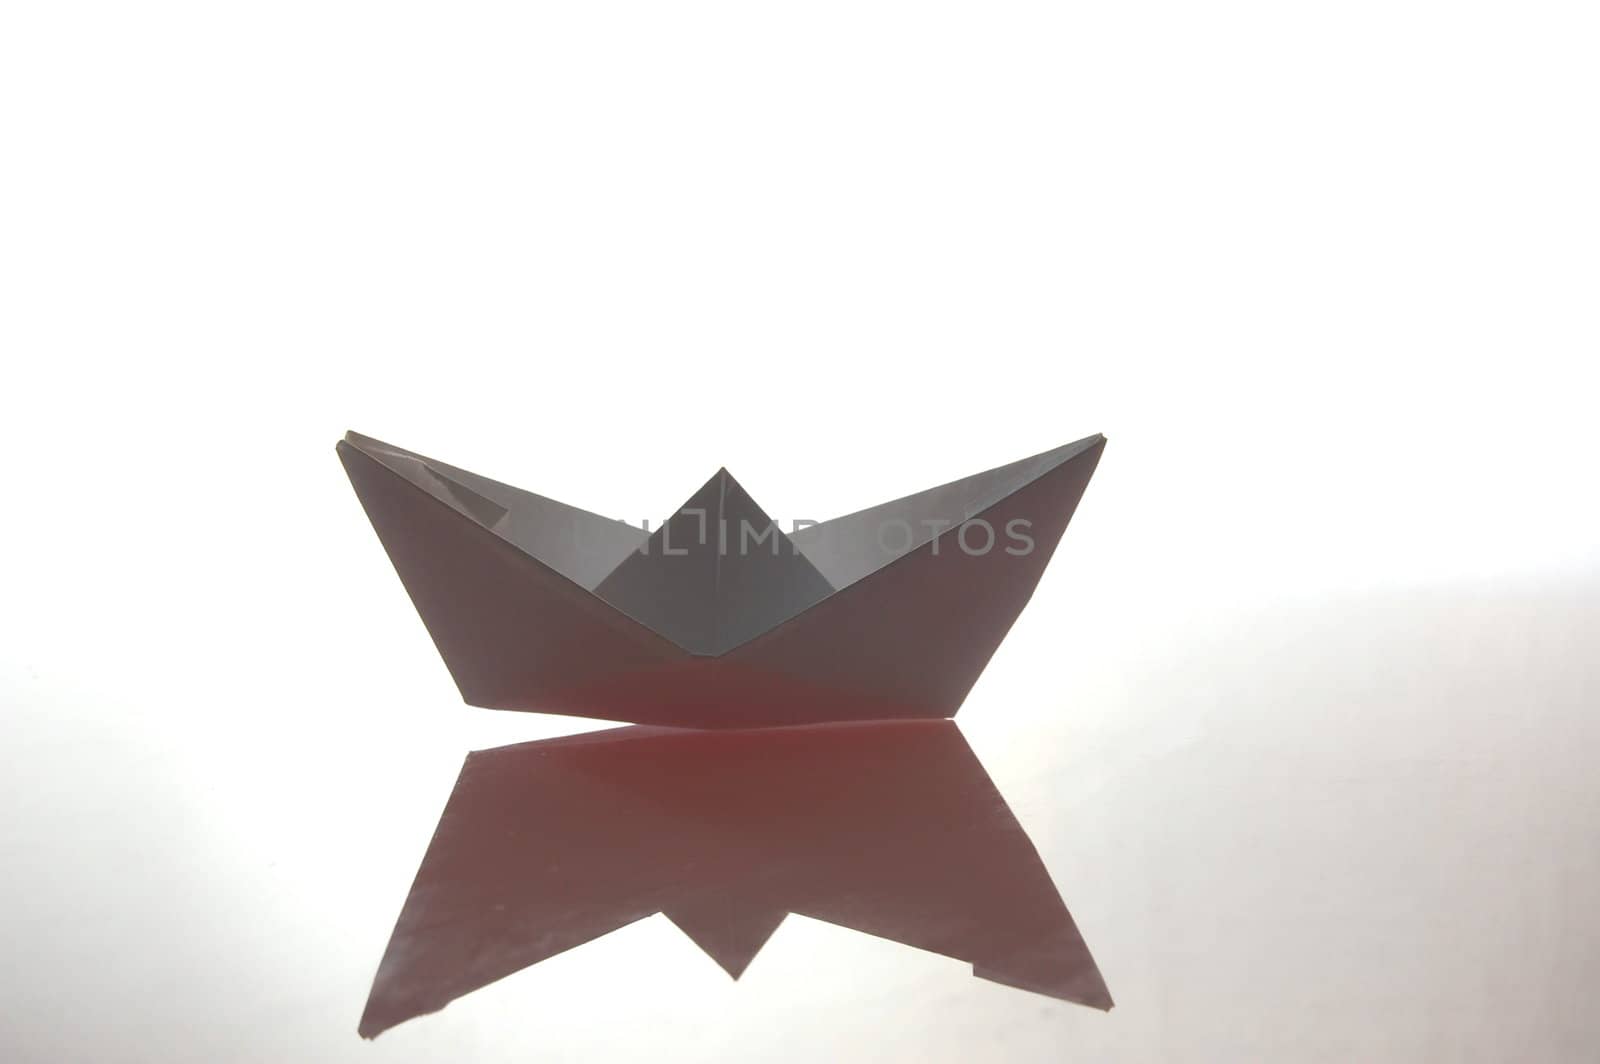 paper ship or boat showing concept for global economy